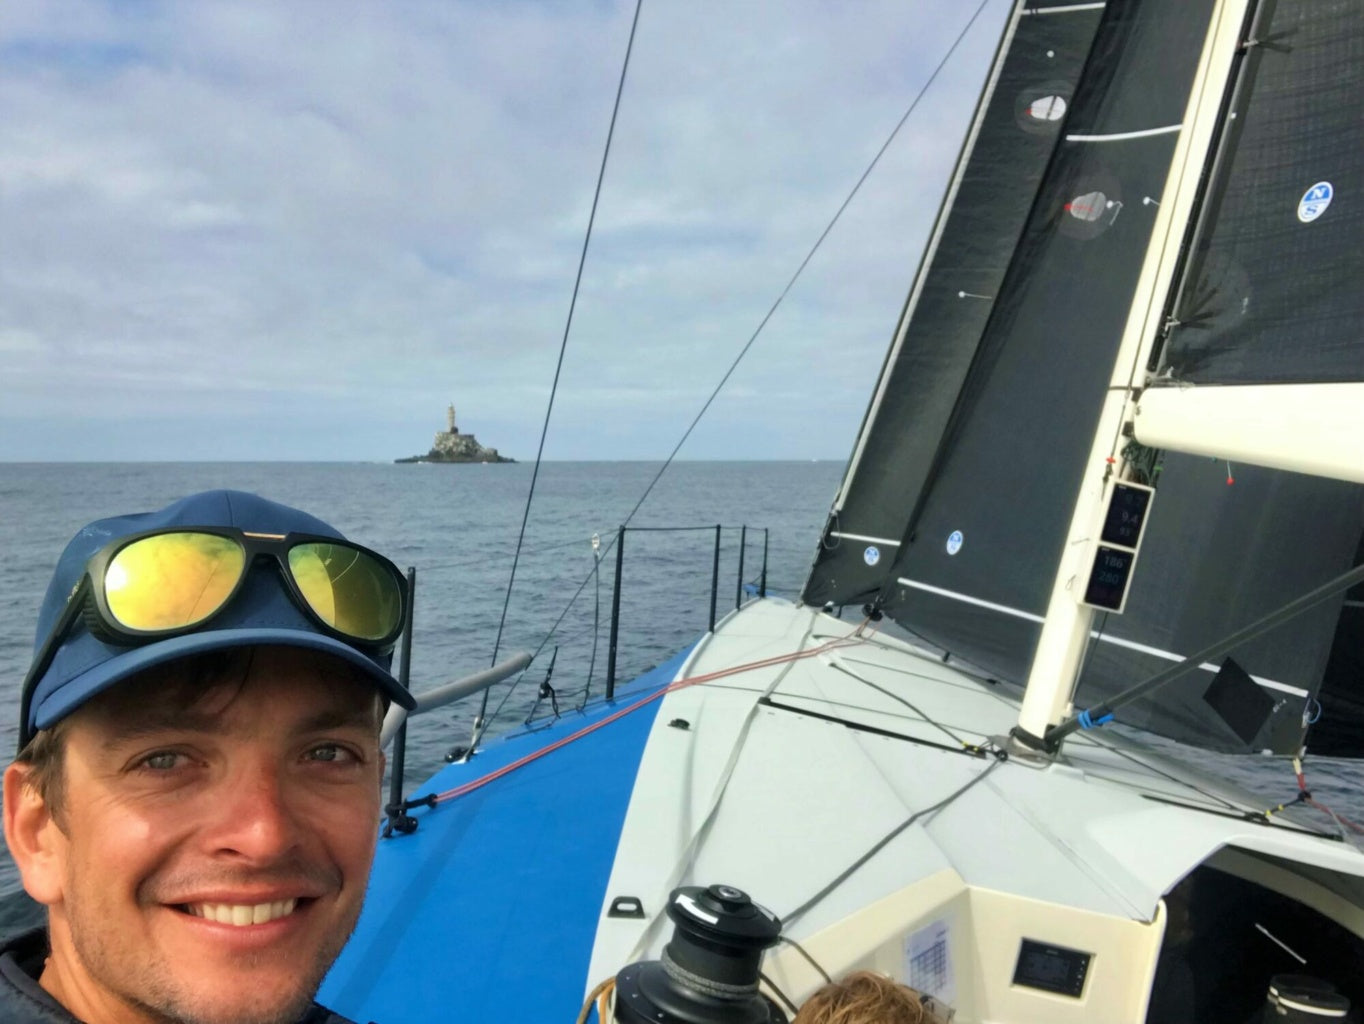 Ben Saxton racing onboard Oystercatcher and soon to round the prestigious Fastnet Rock